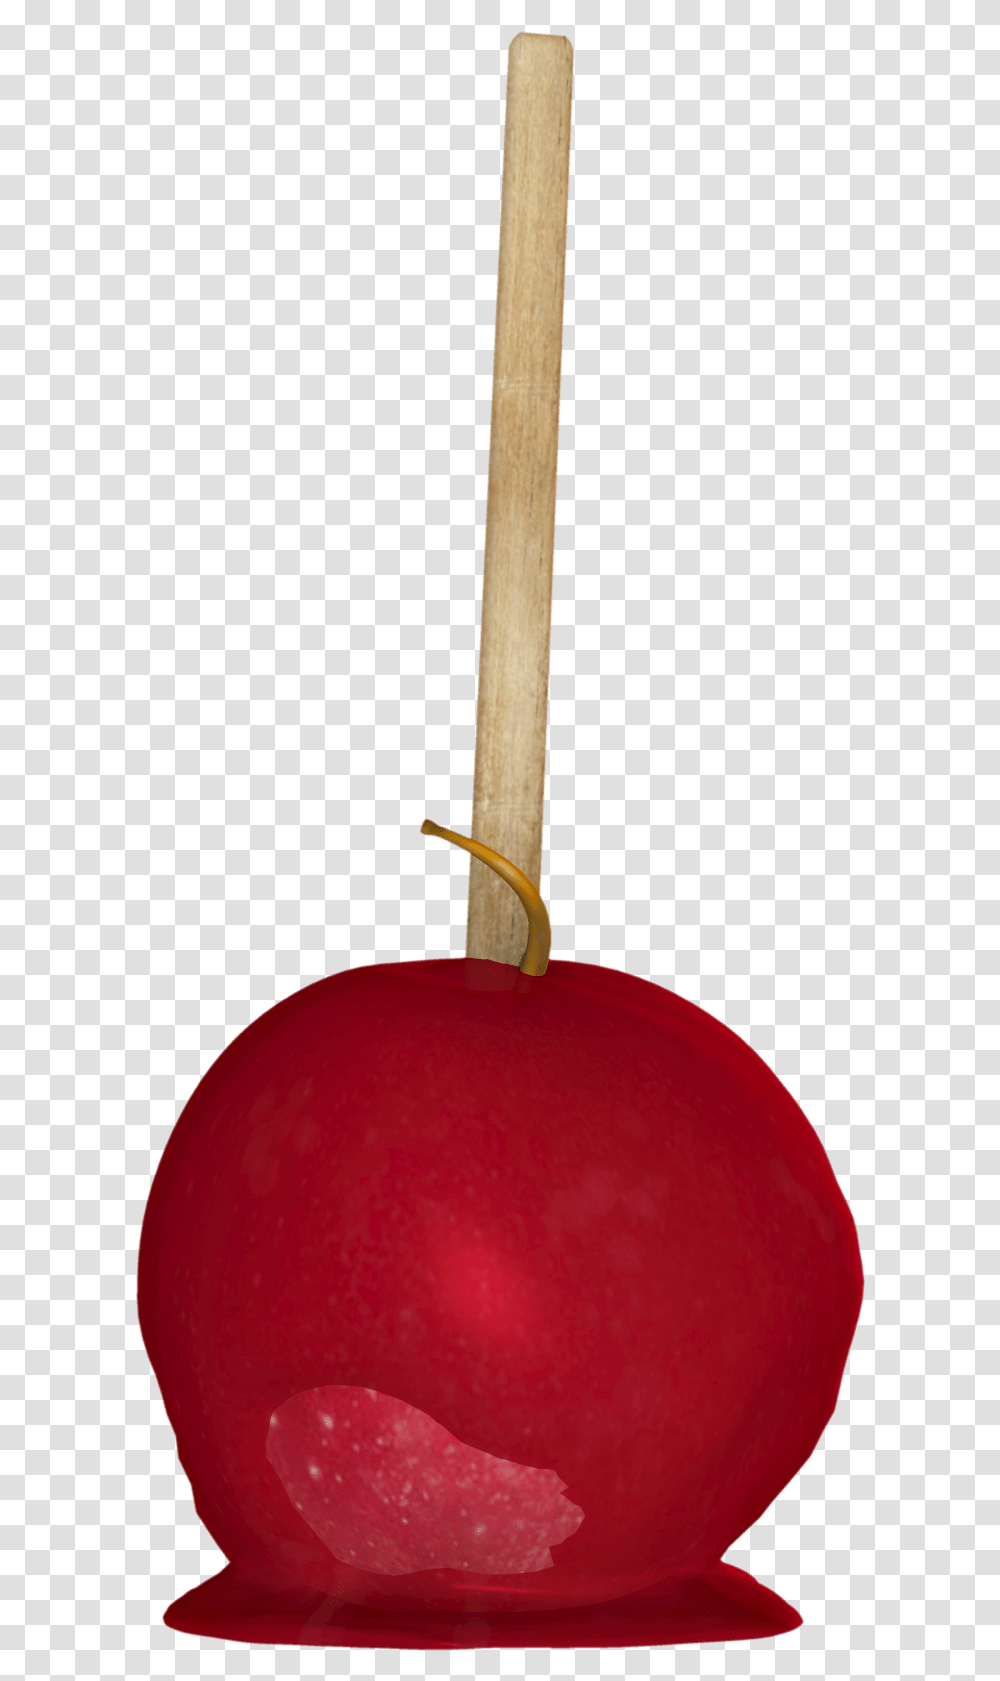 Candy Apple Candy Apple Clipart Background Candy Apple, Plant, Fruit, Food, Cherry Transparent Png